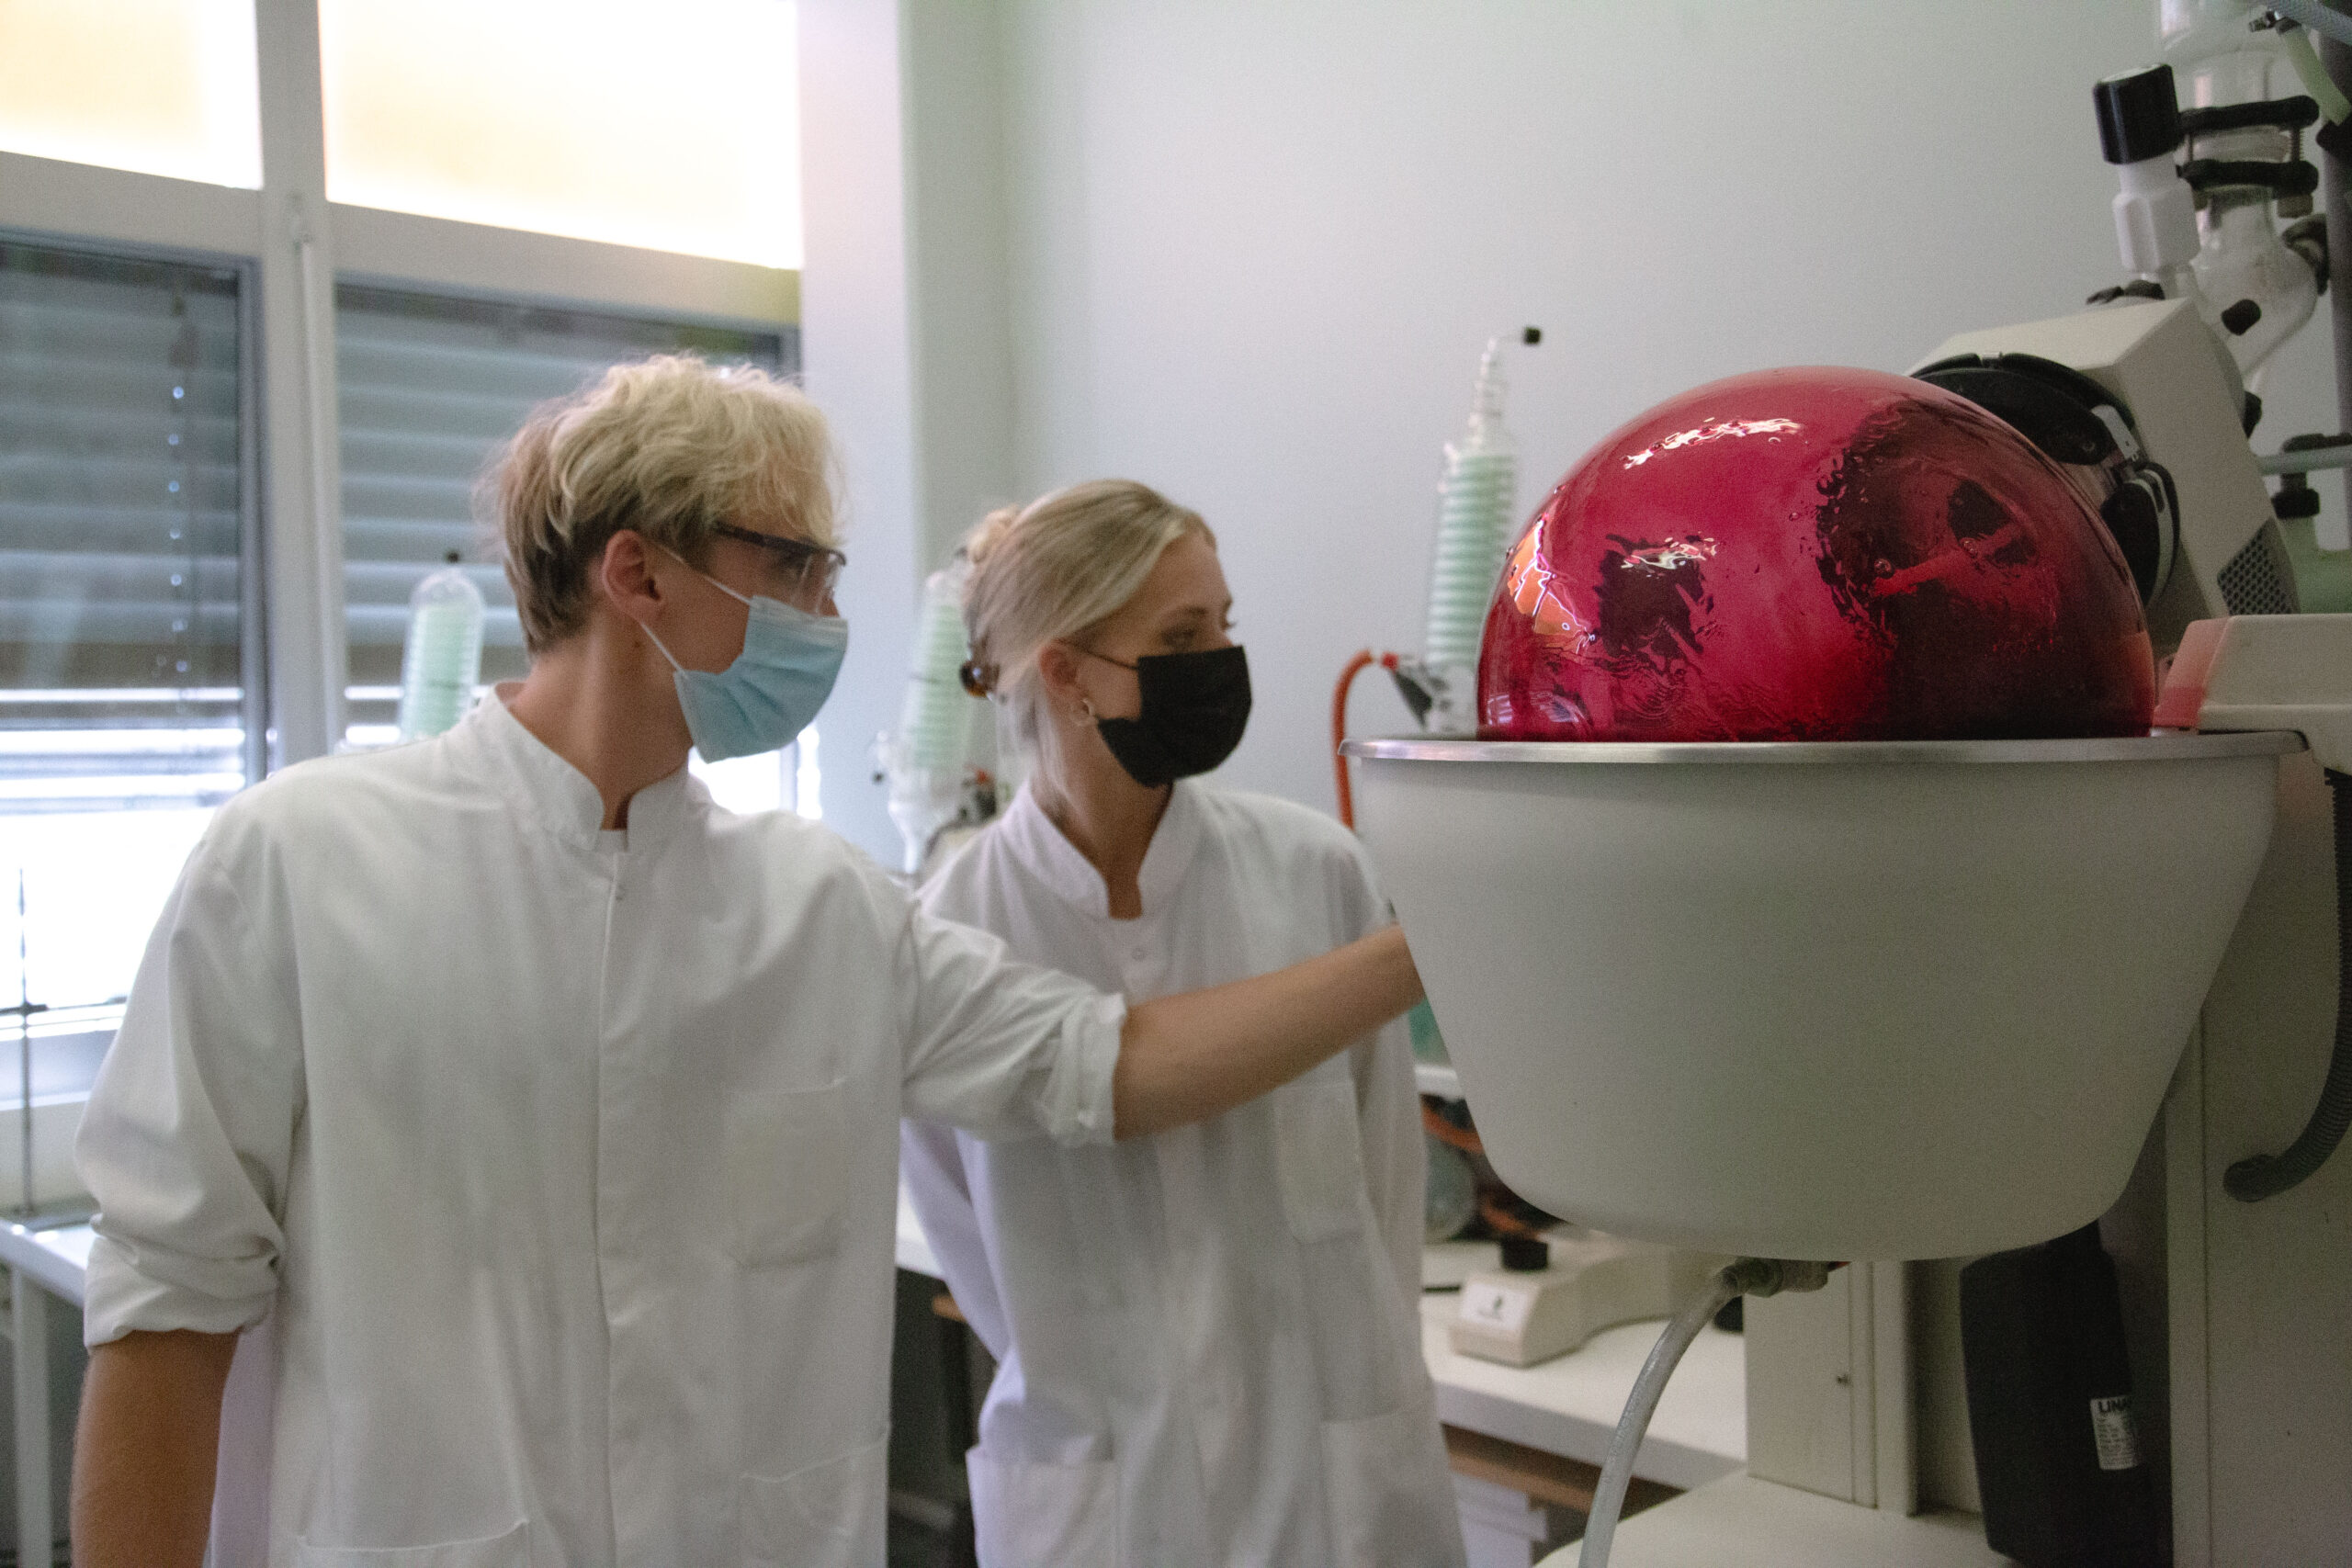 Jonathan Klein and Emily Hayes, both wearing white lab coats and face masks, look at and touch a large white machine in a lab.